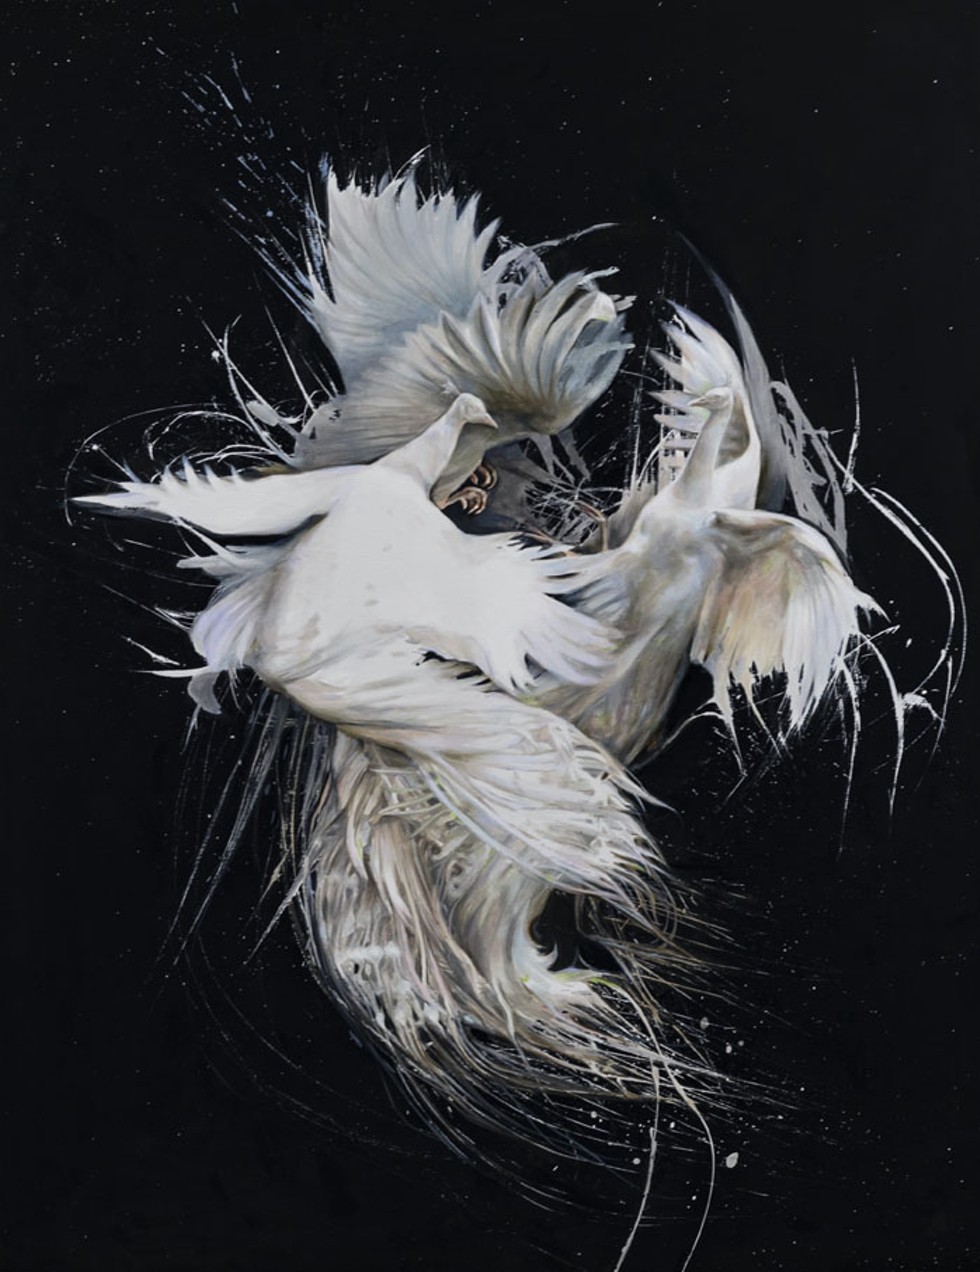 Lily Morris, "Septentrio," oil and acrylic on linen, 2021